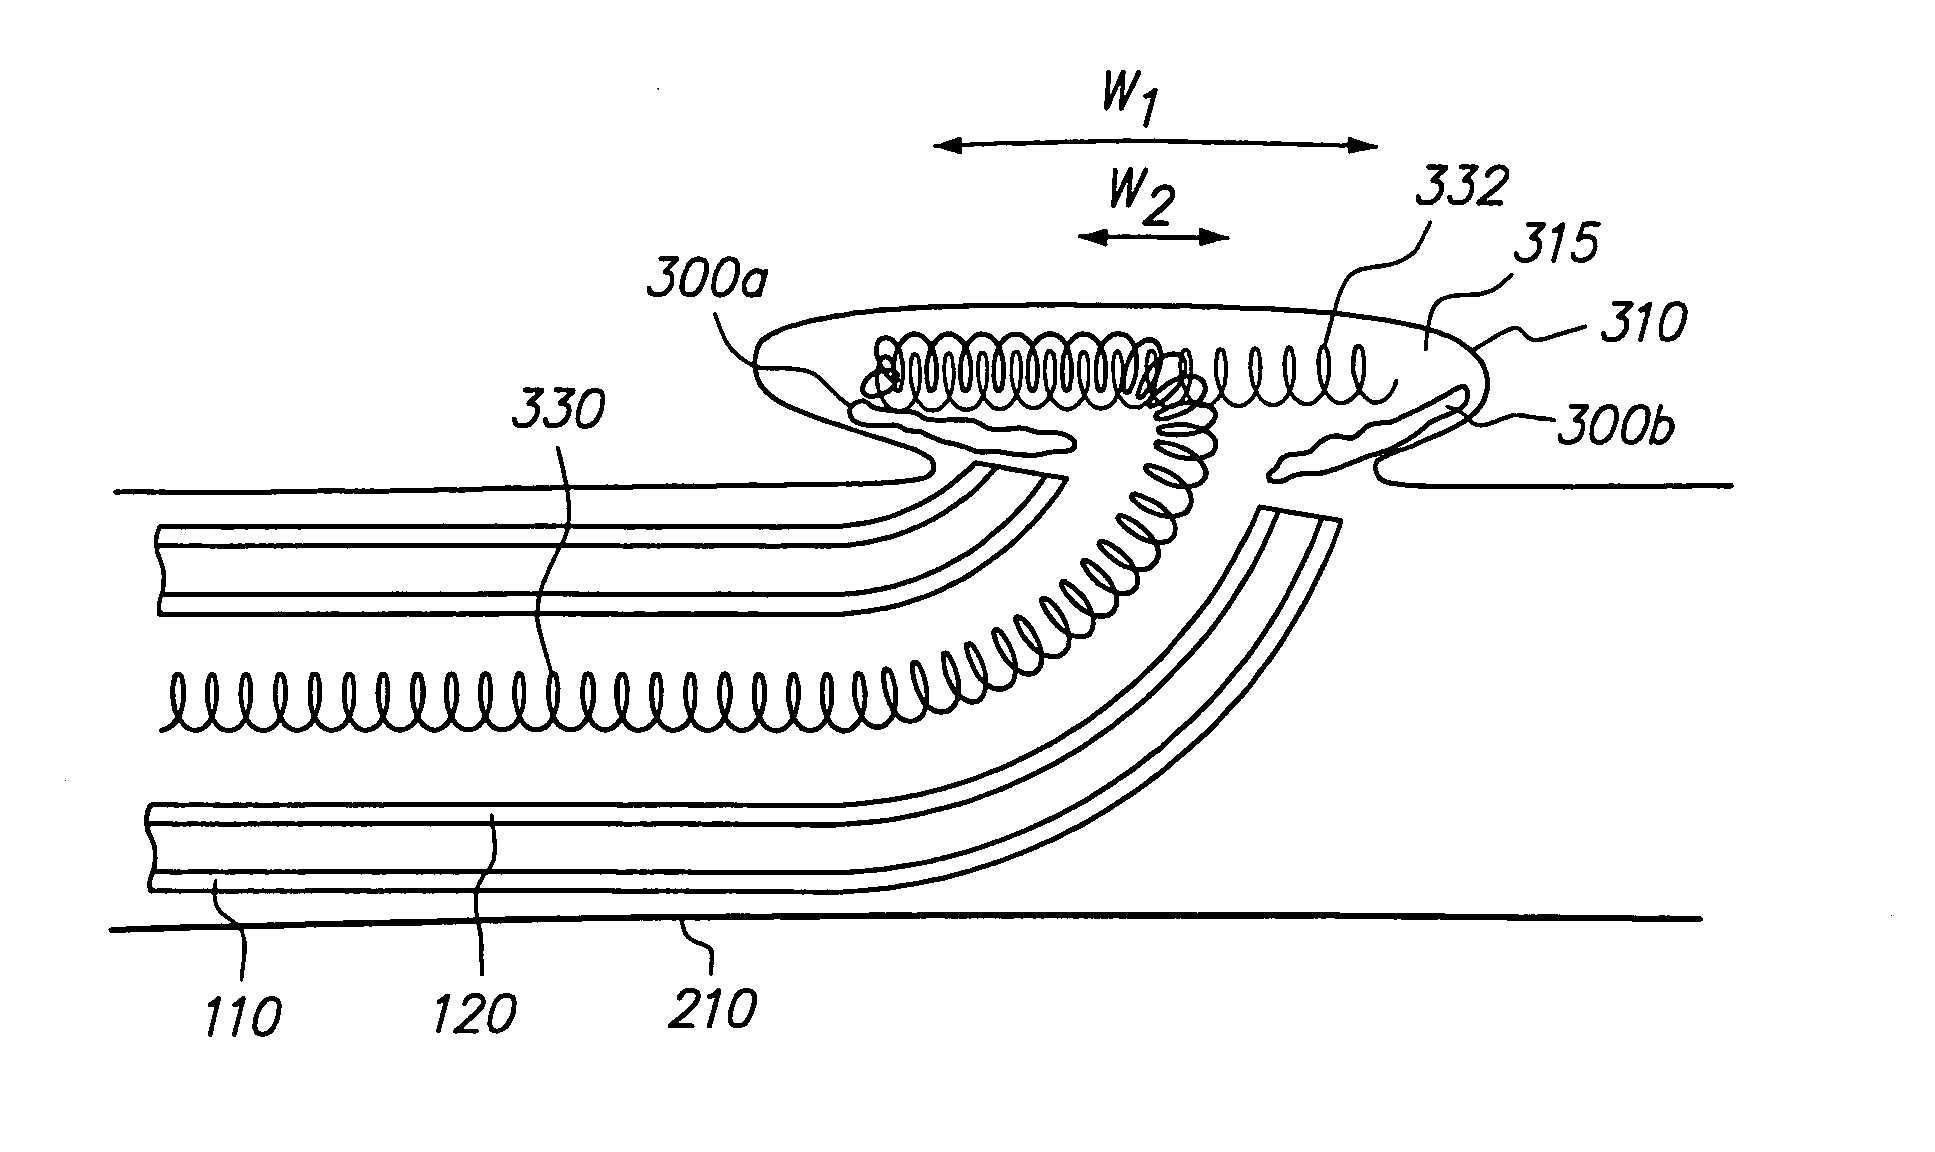 Method and system for delivering an implant utilizing a lumen reducing member